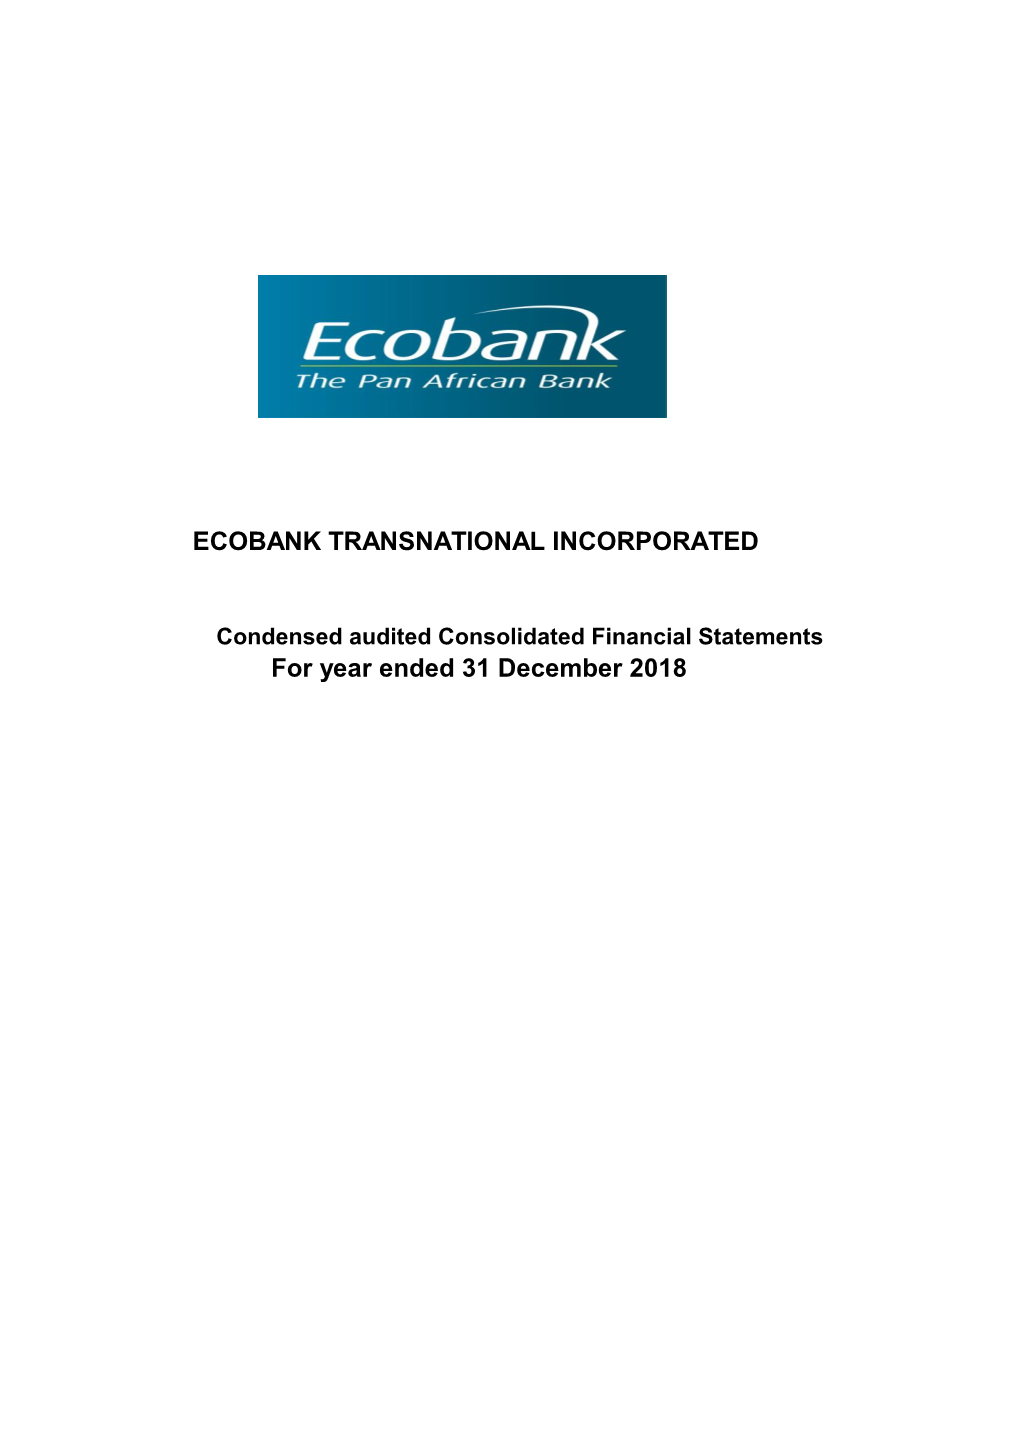 ECOBANK TRANSNATIONAL INCORPORATED for Year Ended 31 December 2018